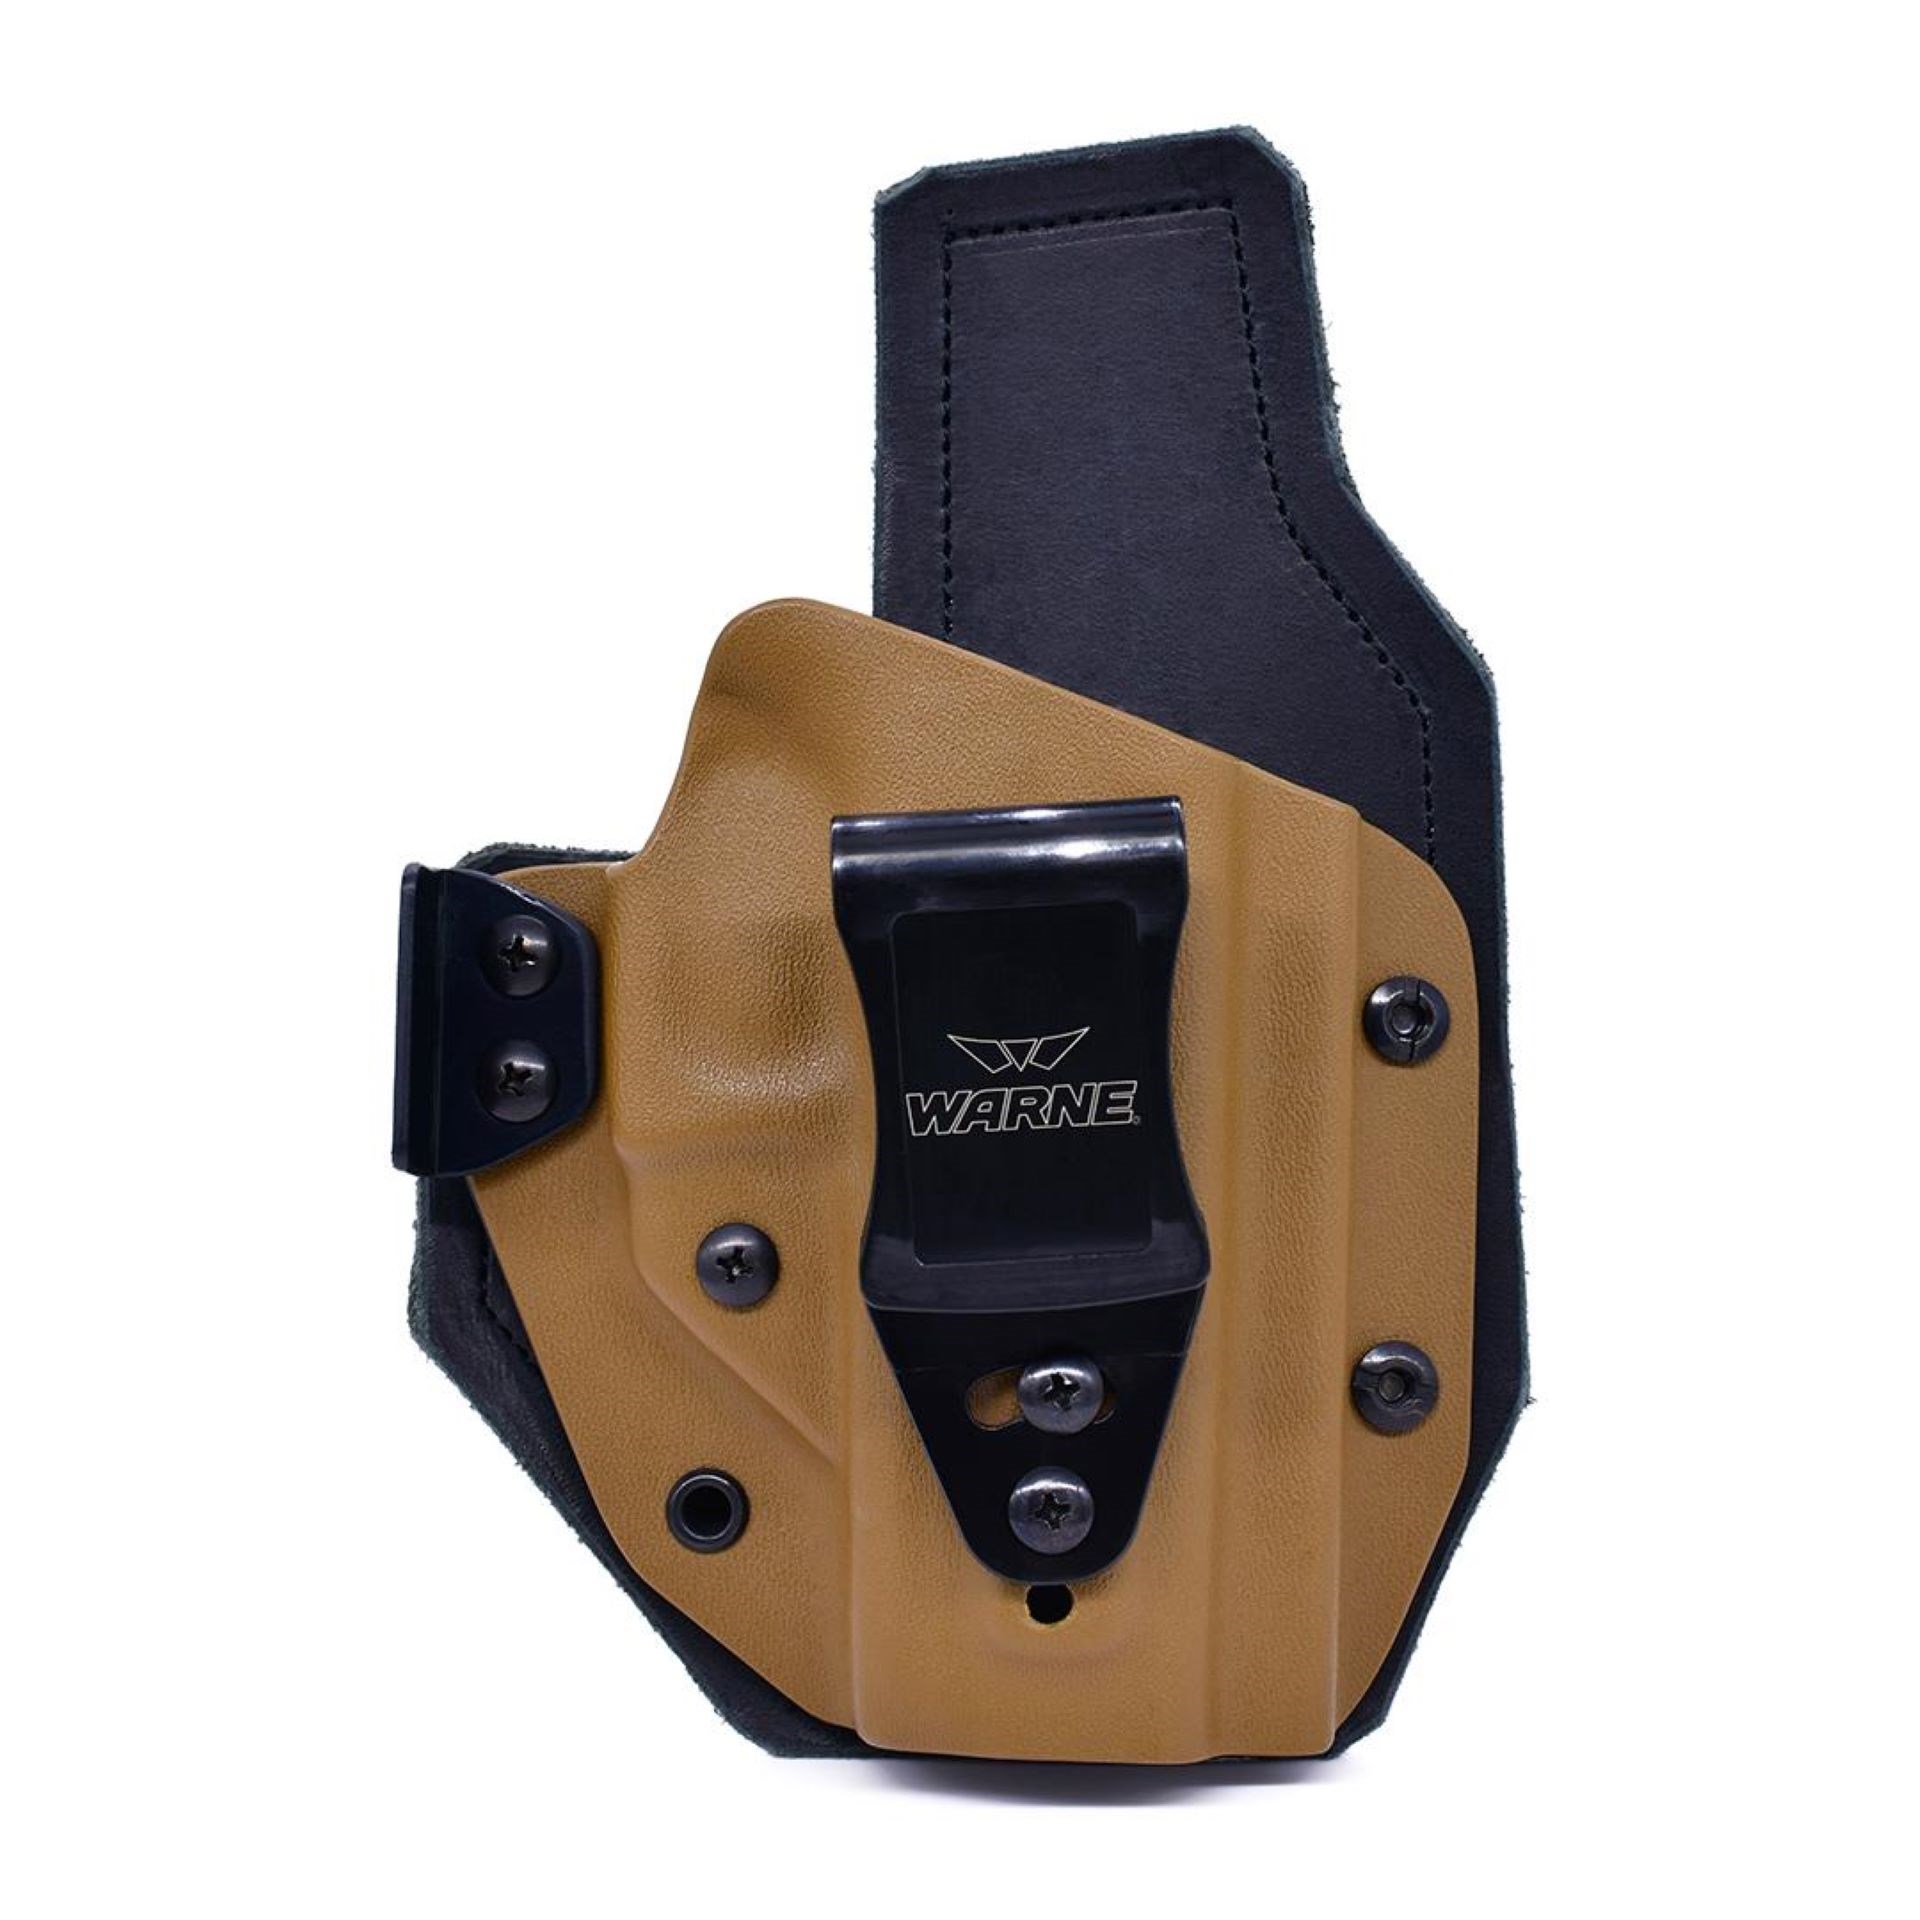 Warne, EDC, holsters, concealed carry holsters, CCW, New for 2022